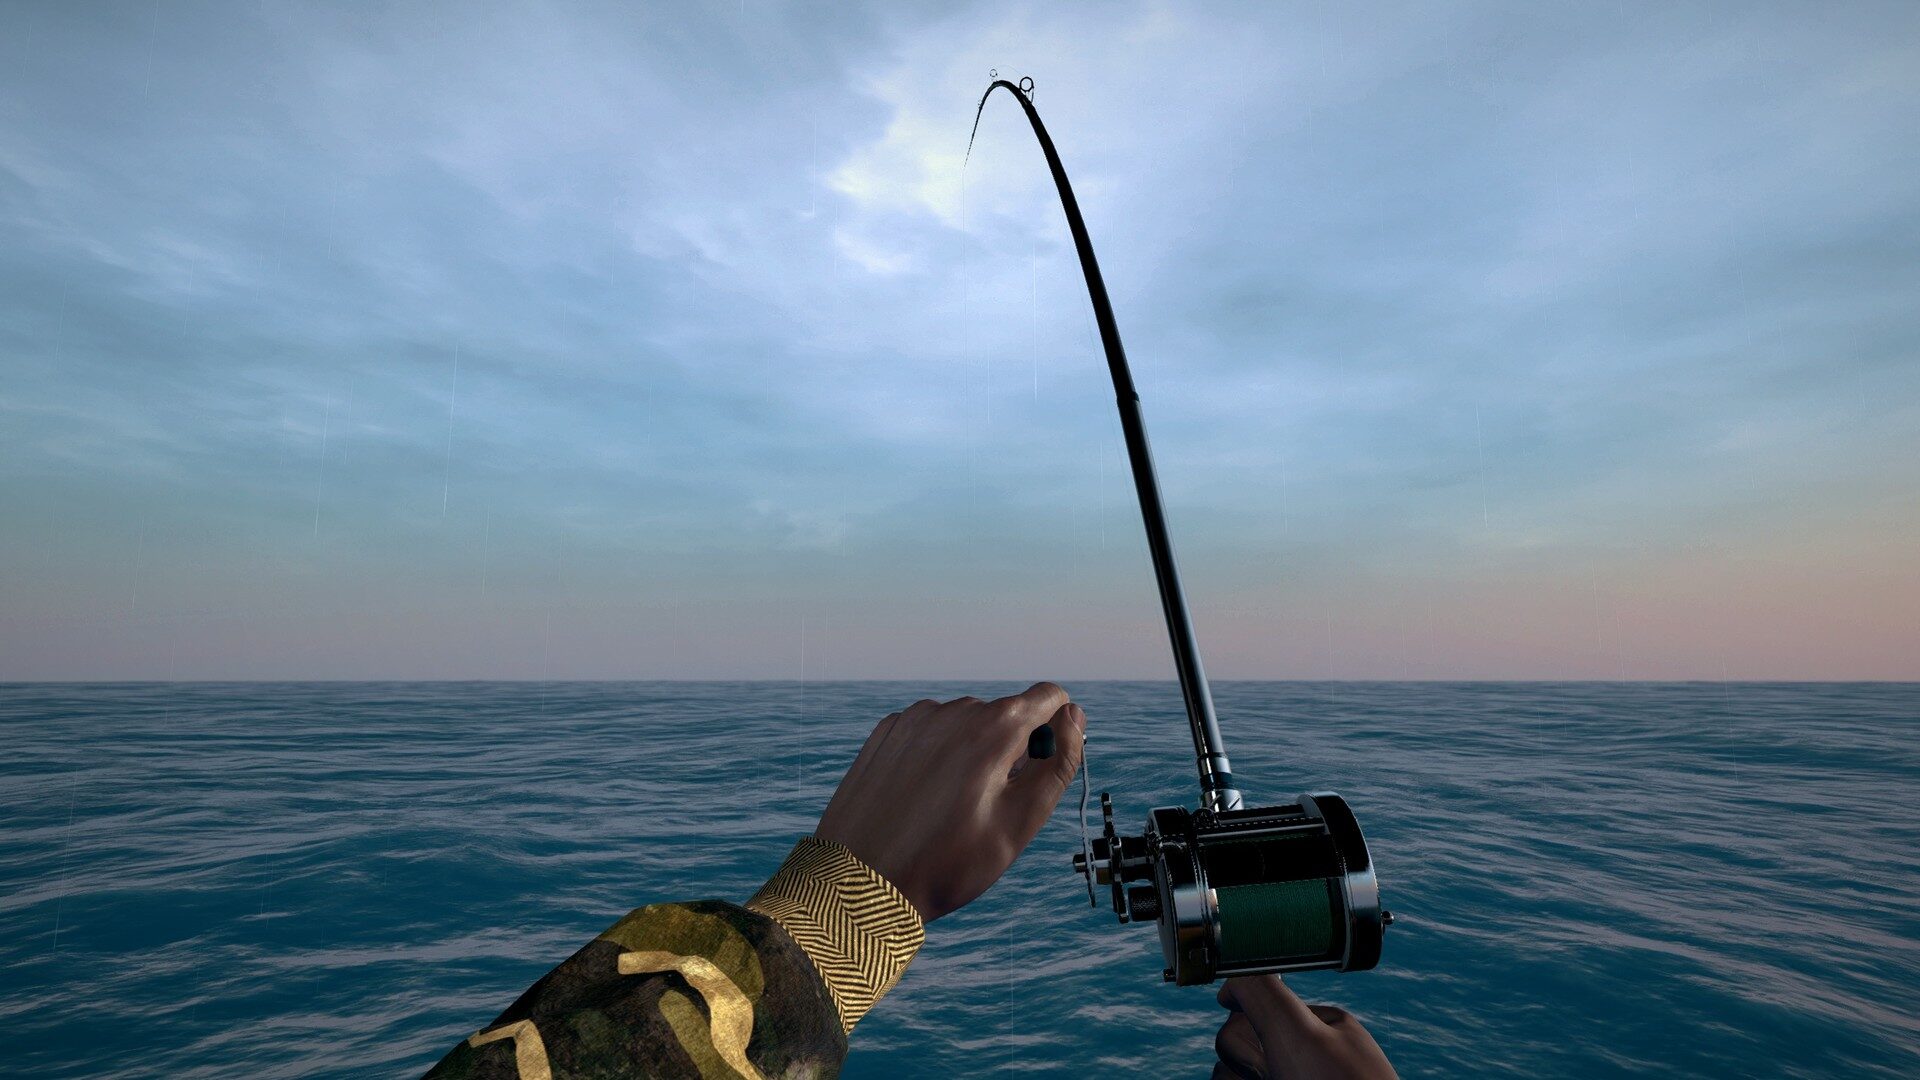 Buy cheap Ultimate Fishing Simulator - Gold Edition cd key - lowest price